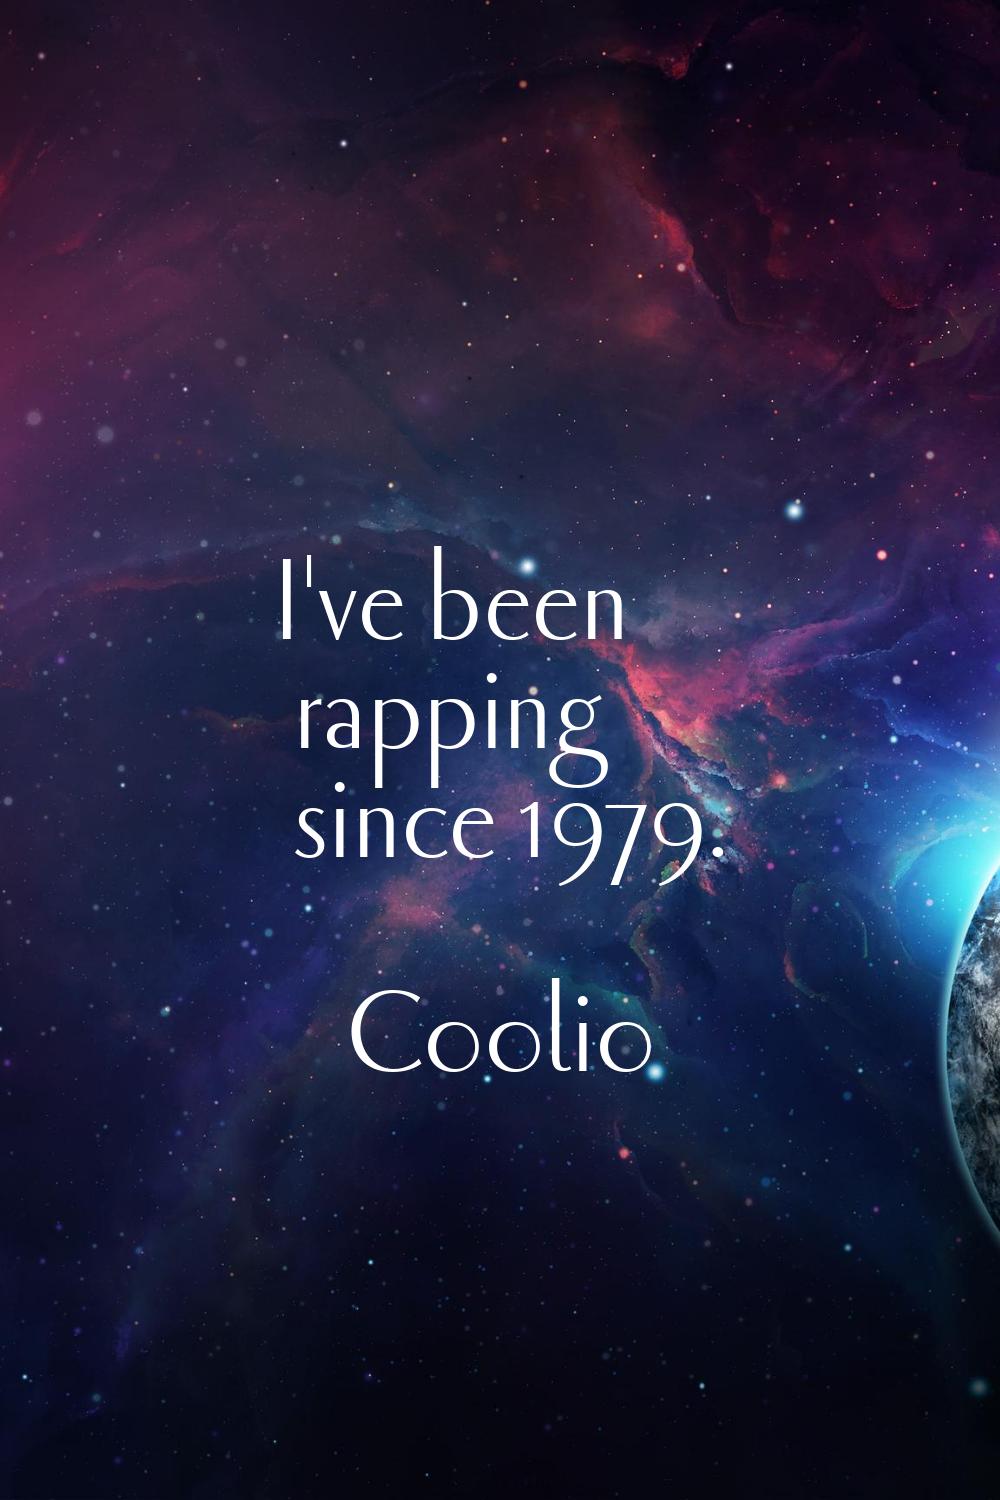 I've been rapping since 1979.